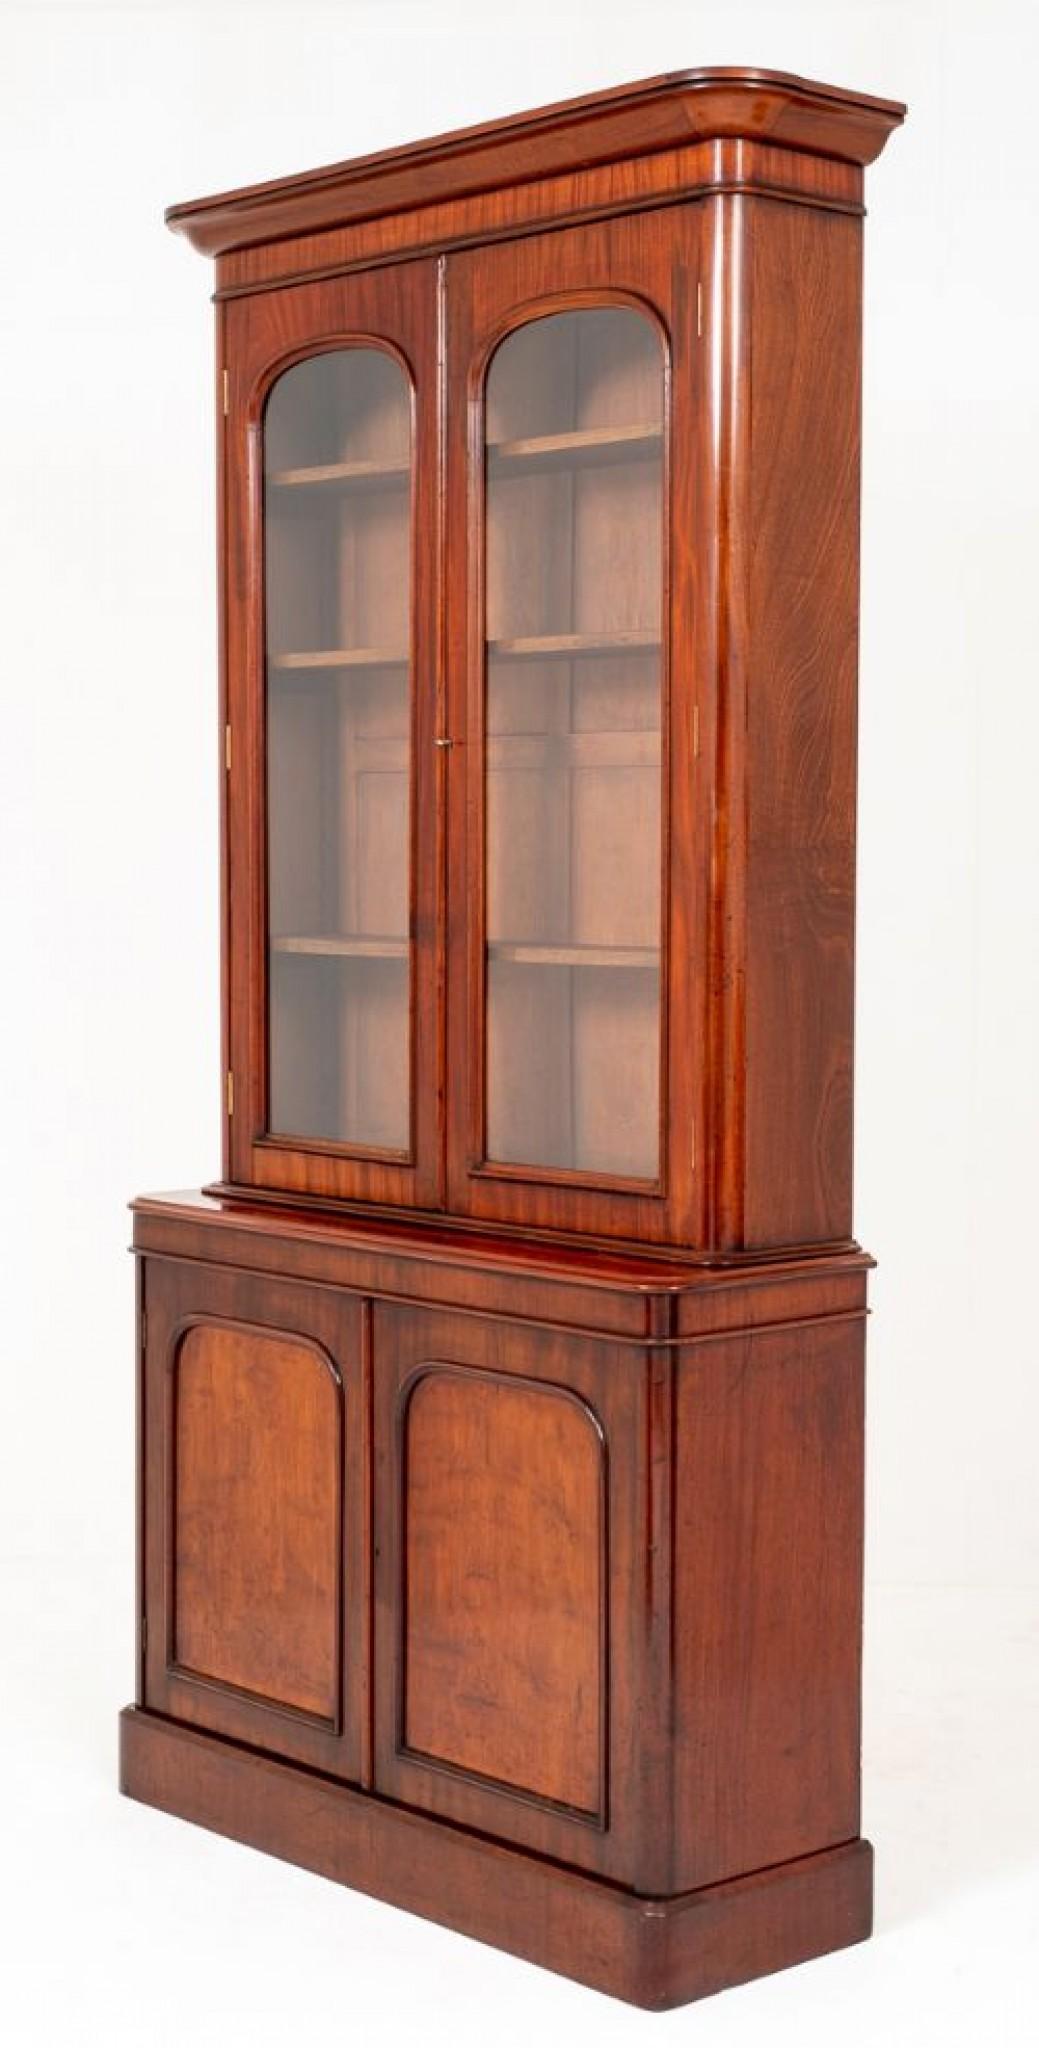 Victorian Mahogany 2 door Glazed Bookcase standing on a plinth base.
The bottom section of the bookcase having panelled doors with 2 adjustable shelves inside.
circa 1860
The upper section featuring 2 Glazed doors also with adjustable